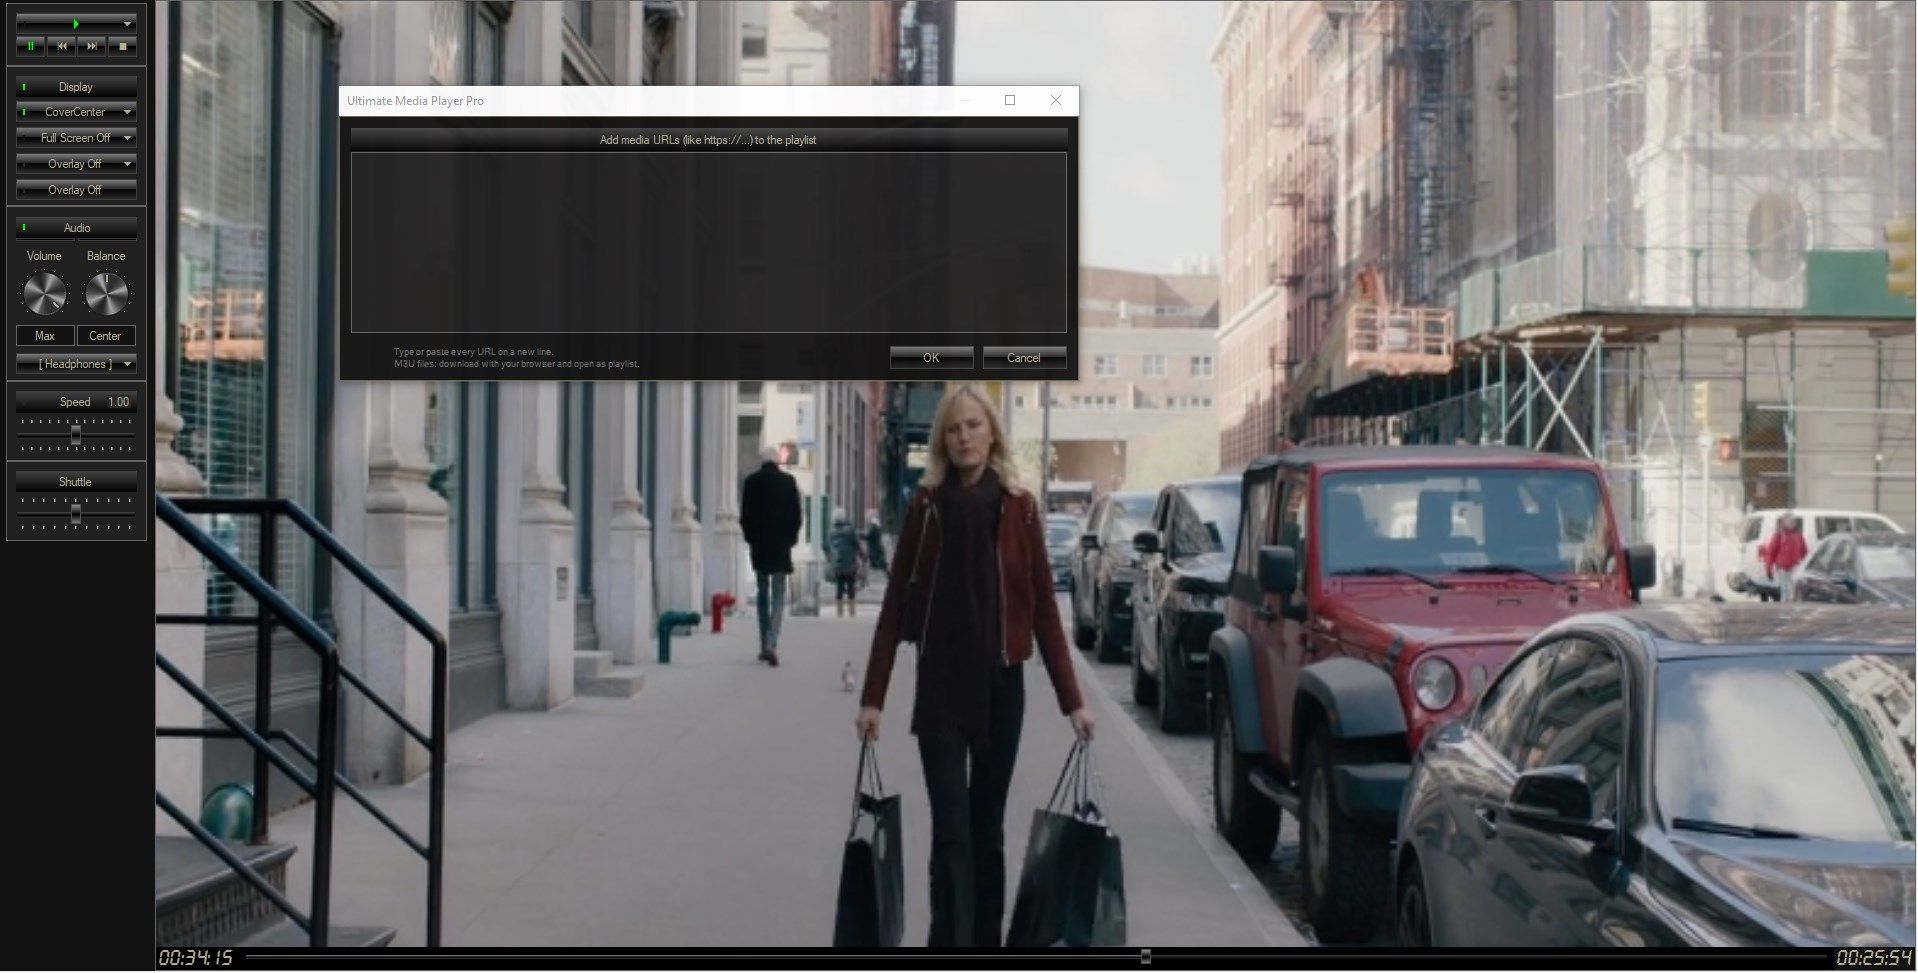 Ultimate Media Player Pro